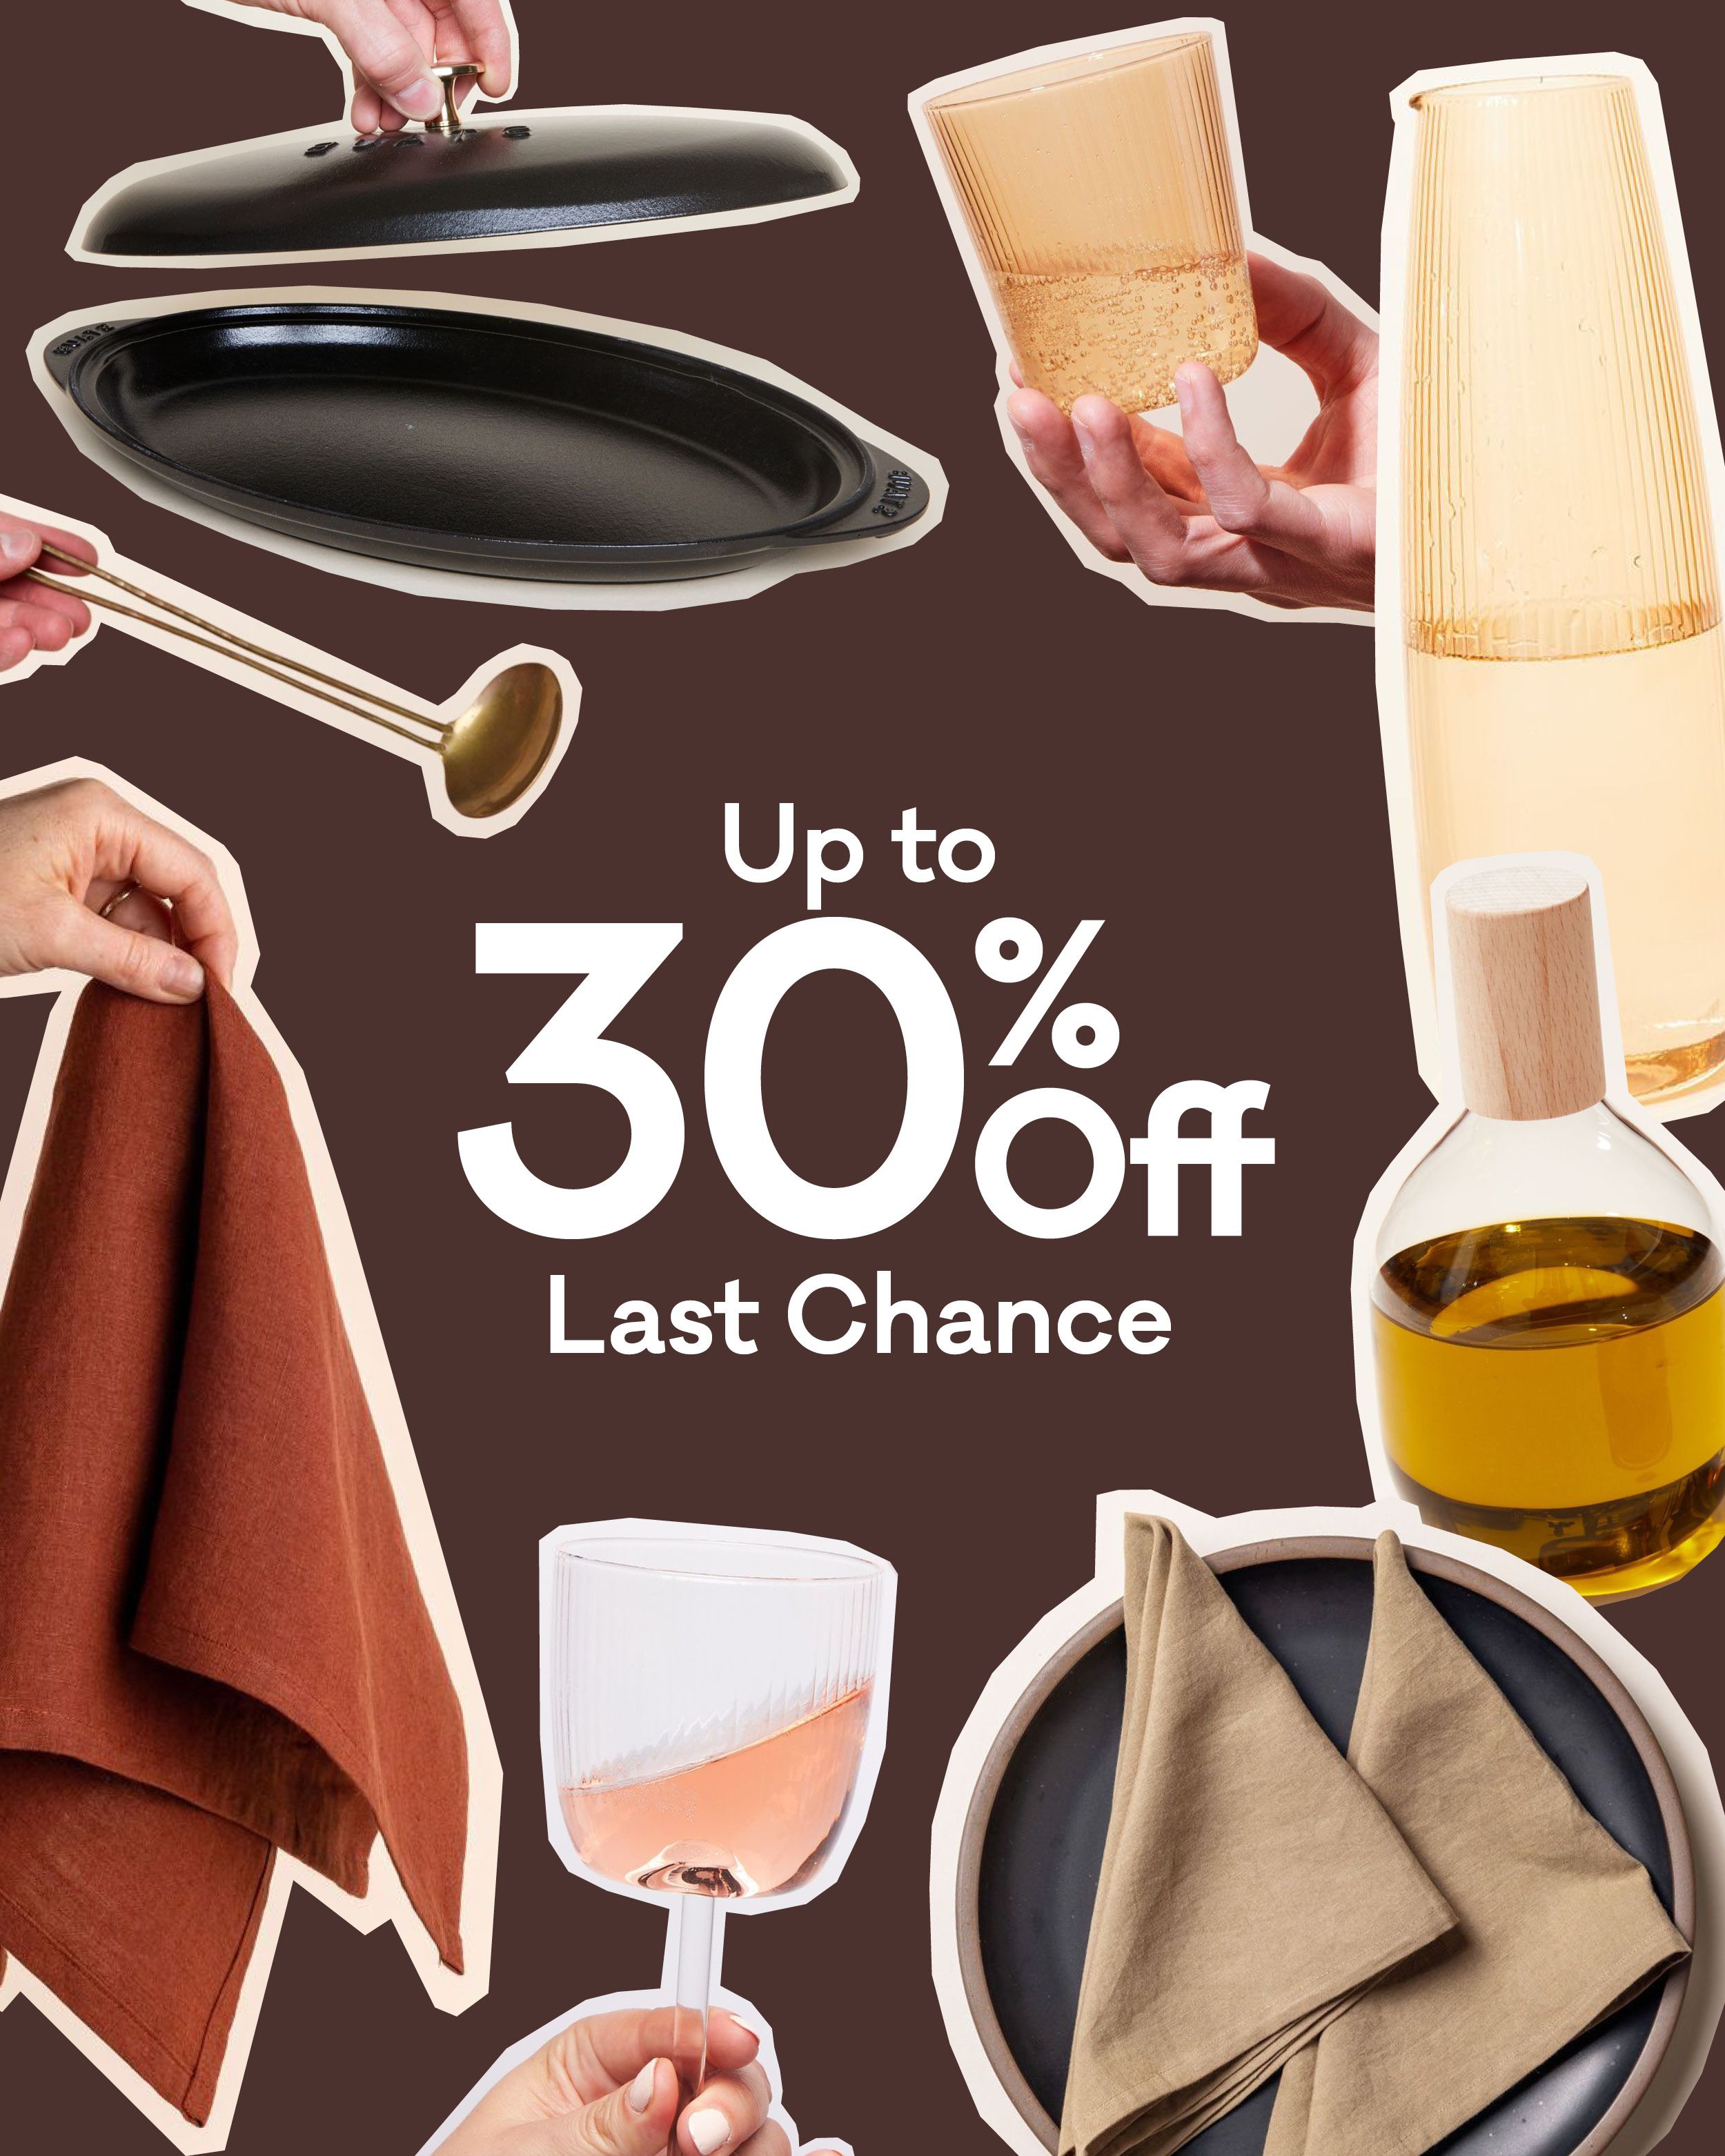 A graphic with a collage featuring an iron fish pan, sophisticated glassware, a large oil cruet, folded napkins, and centered text that reads "Up to 30% Off Last Chance"